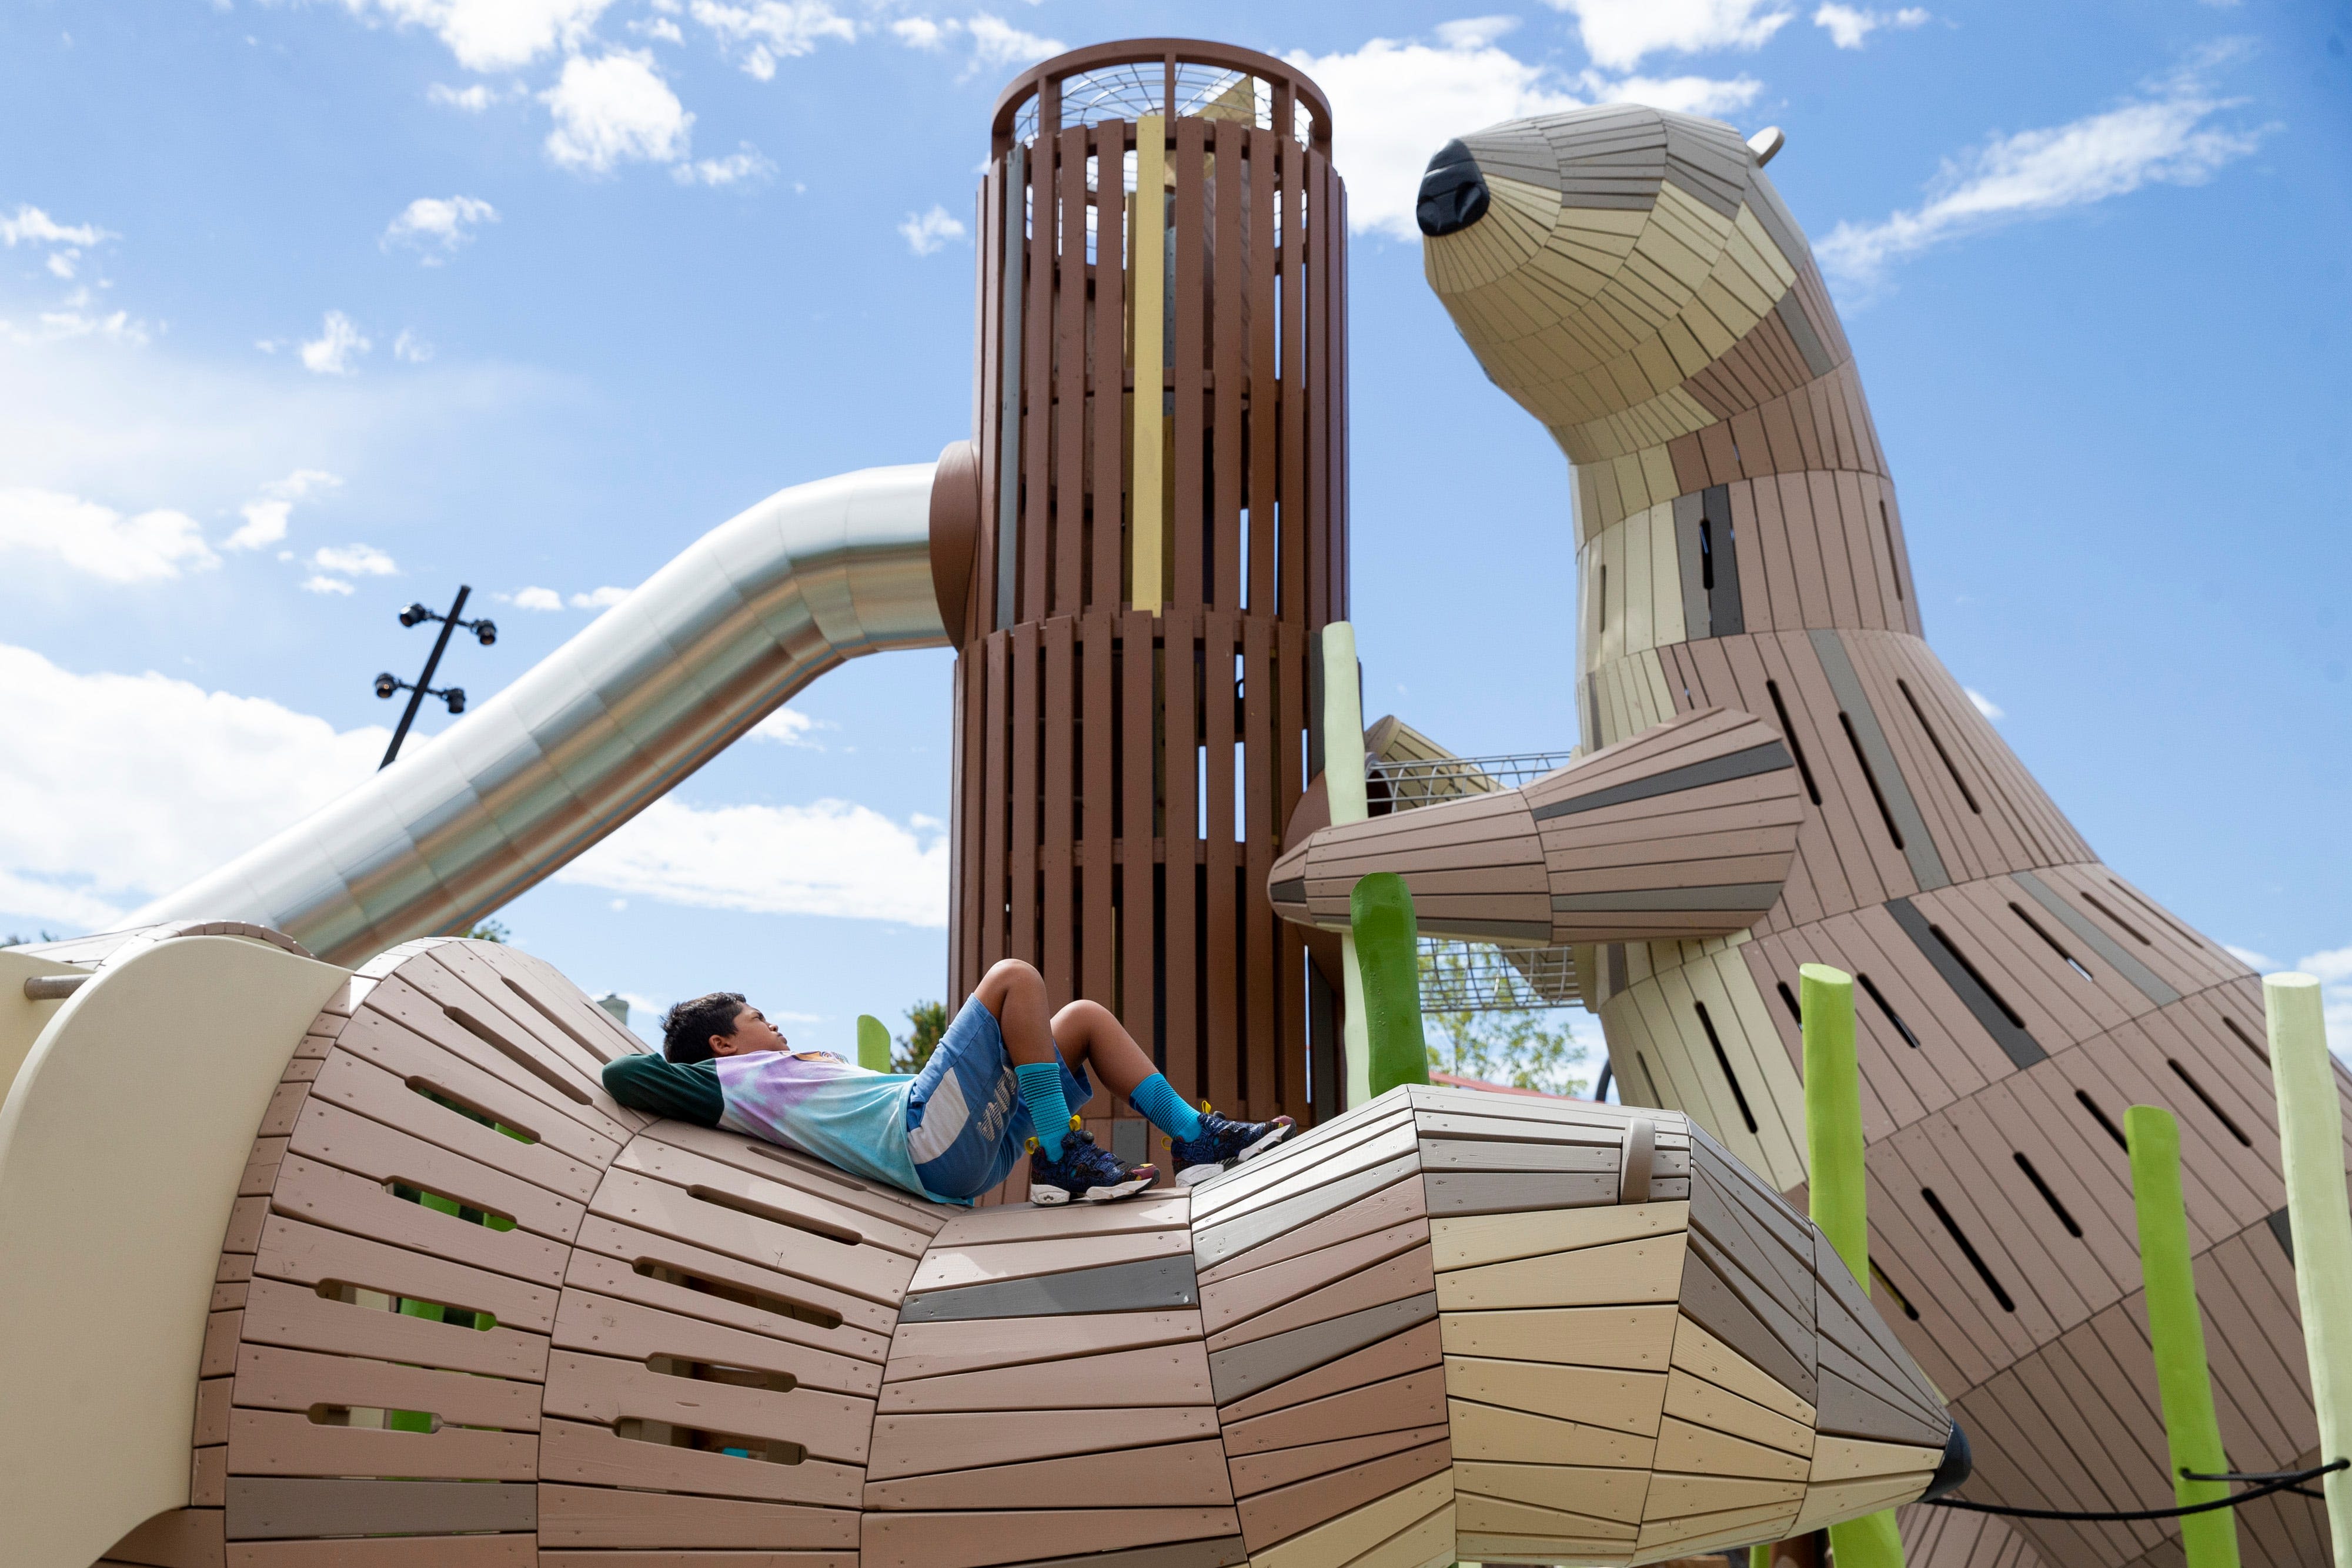 Memphis has one of the most unique playgrounds in the U.S., see where it ranks